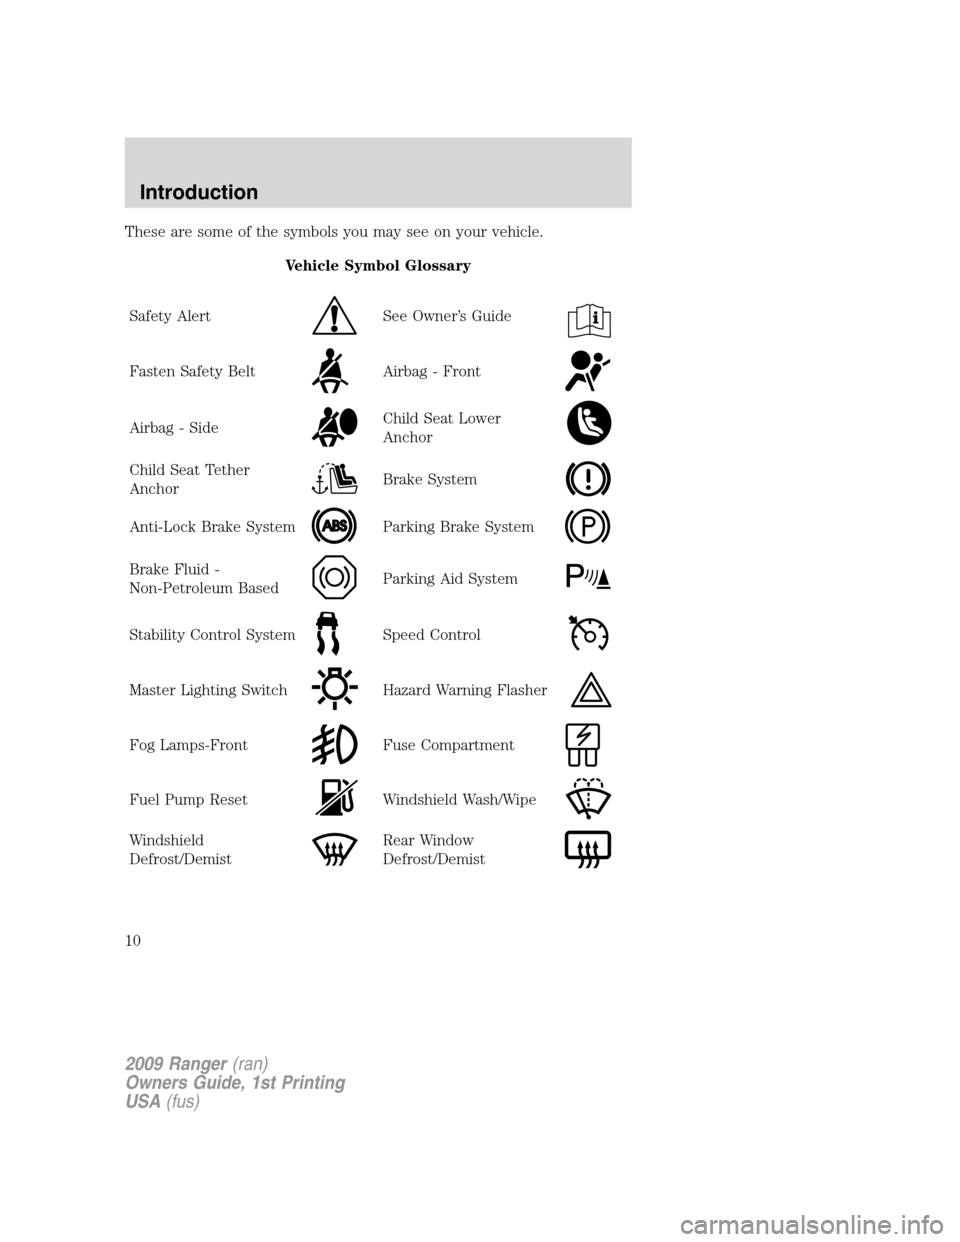 FORD RANGER 2009 2.G Owners Manual These are some of the symbols you may see on your vehicle.
Vehicle Symbol Glossary
Safety Alert
See Owner’s Guide
Fasten Safety BeltAirbag - Front
Airbag - SideChild Seat Lower
Anchor
Child Seat Tet